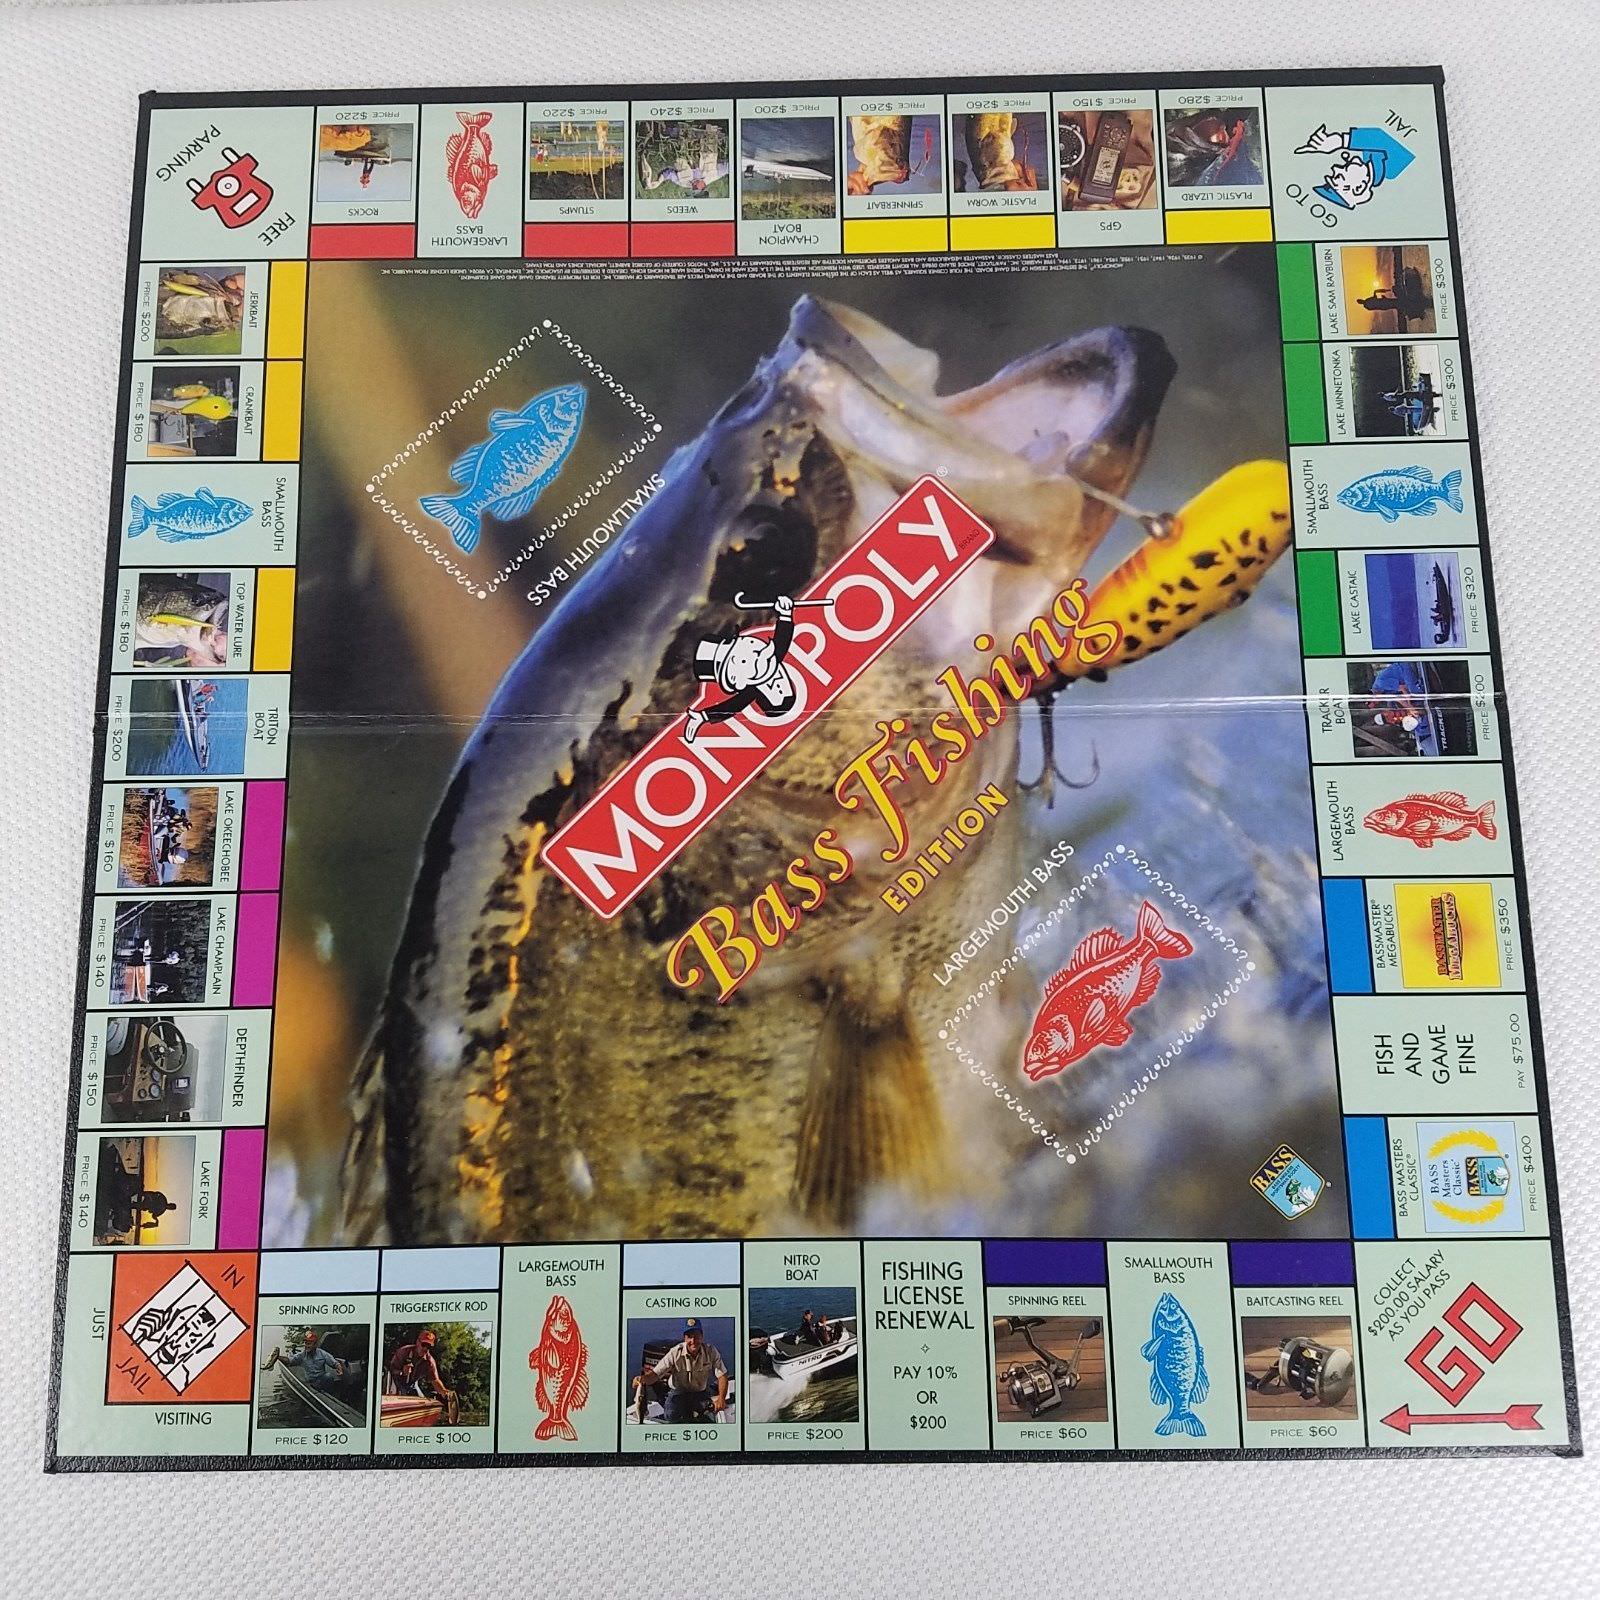 8 Of The Most Obscure Versions Of Monopoly Ever Made 6